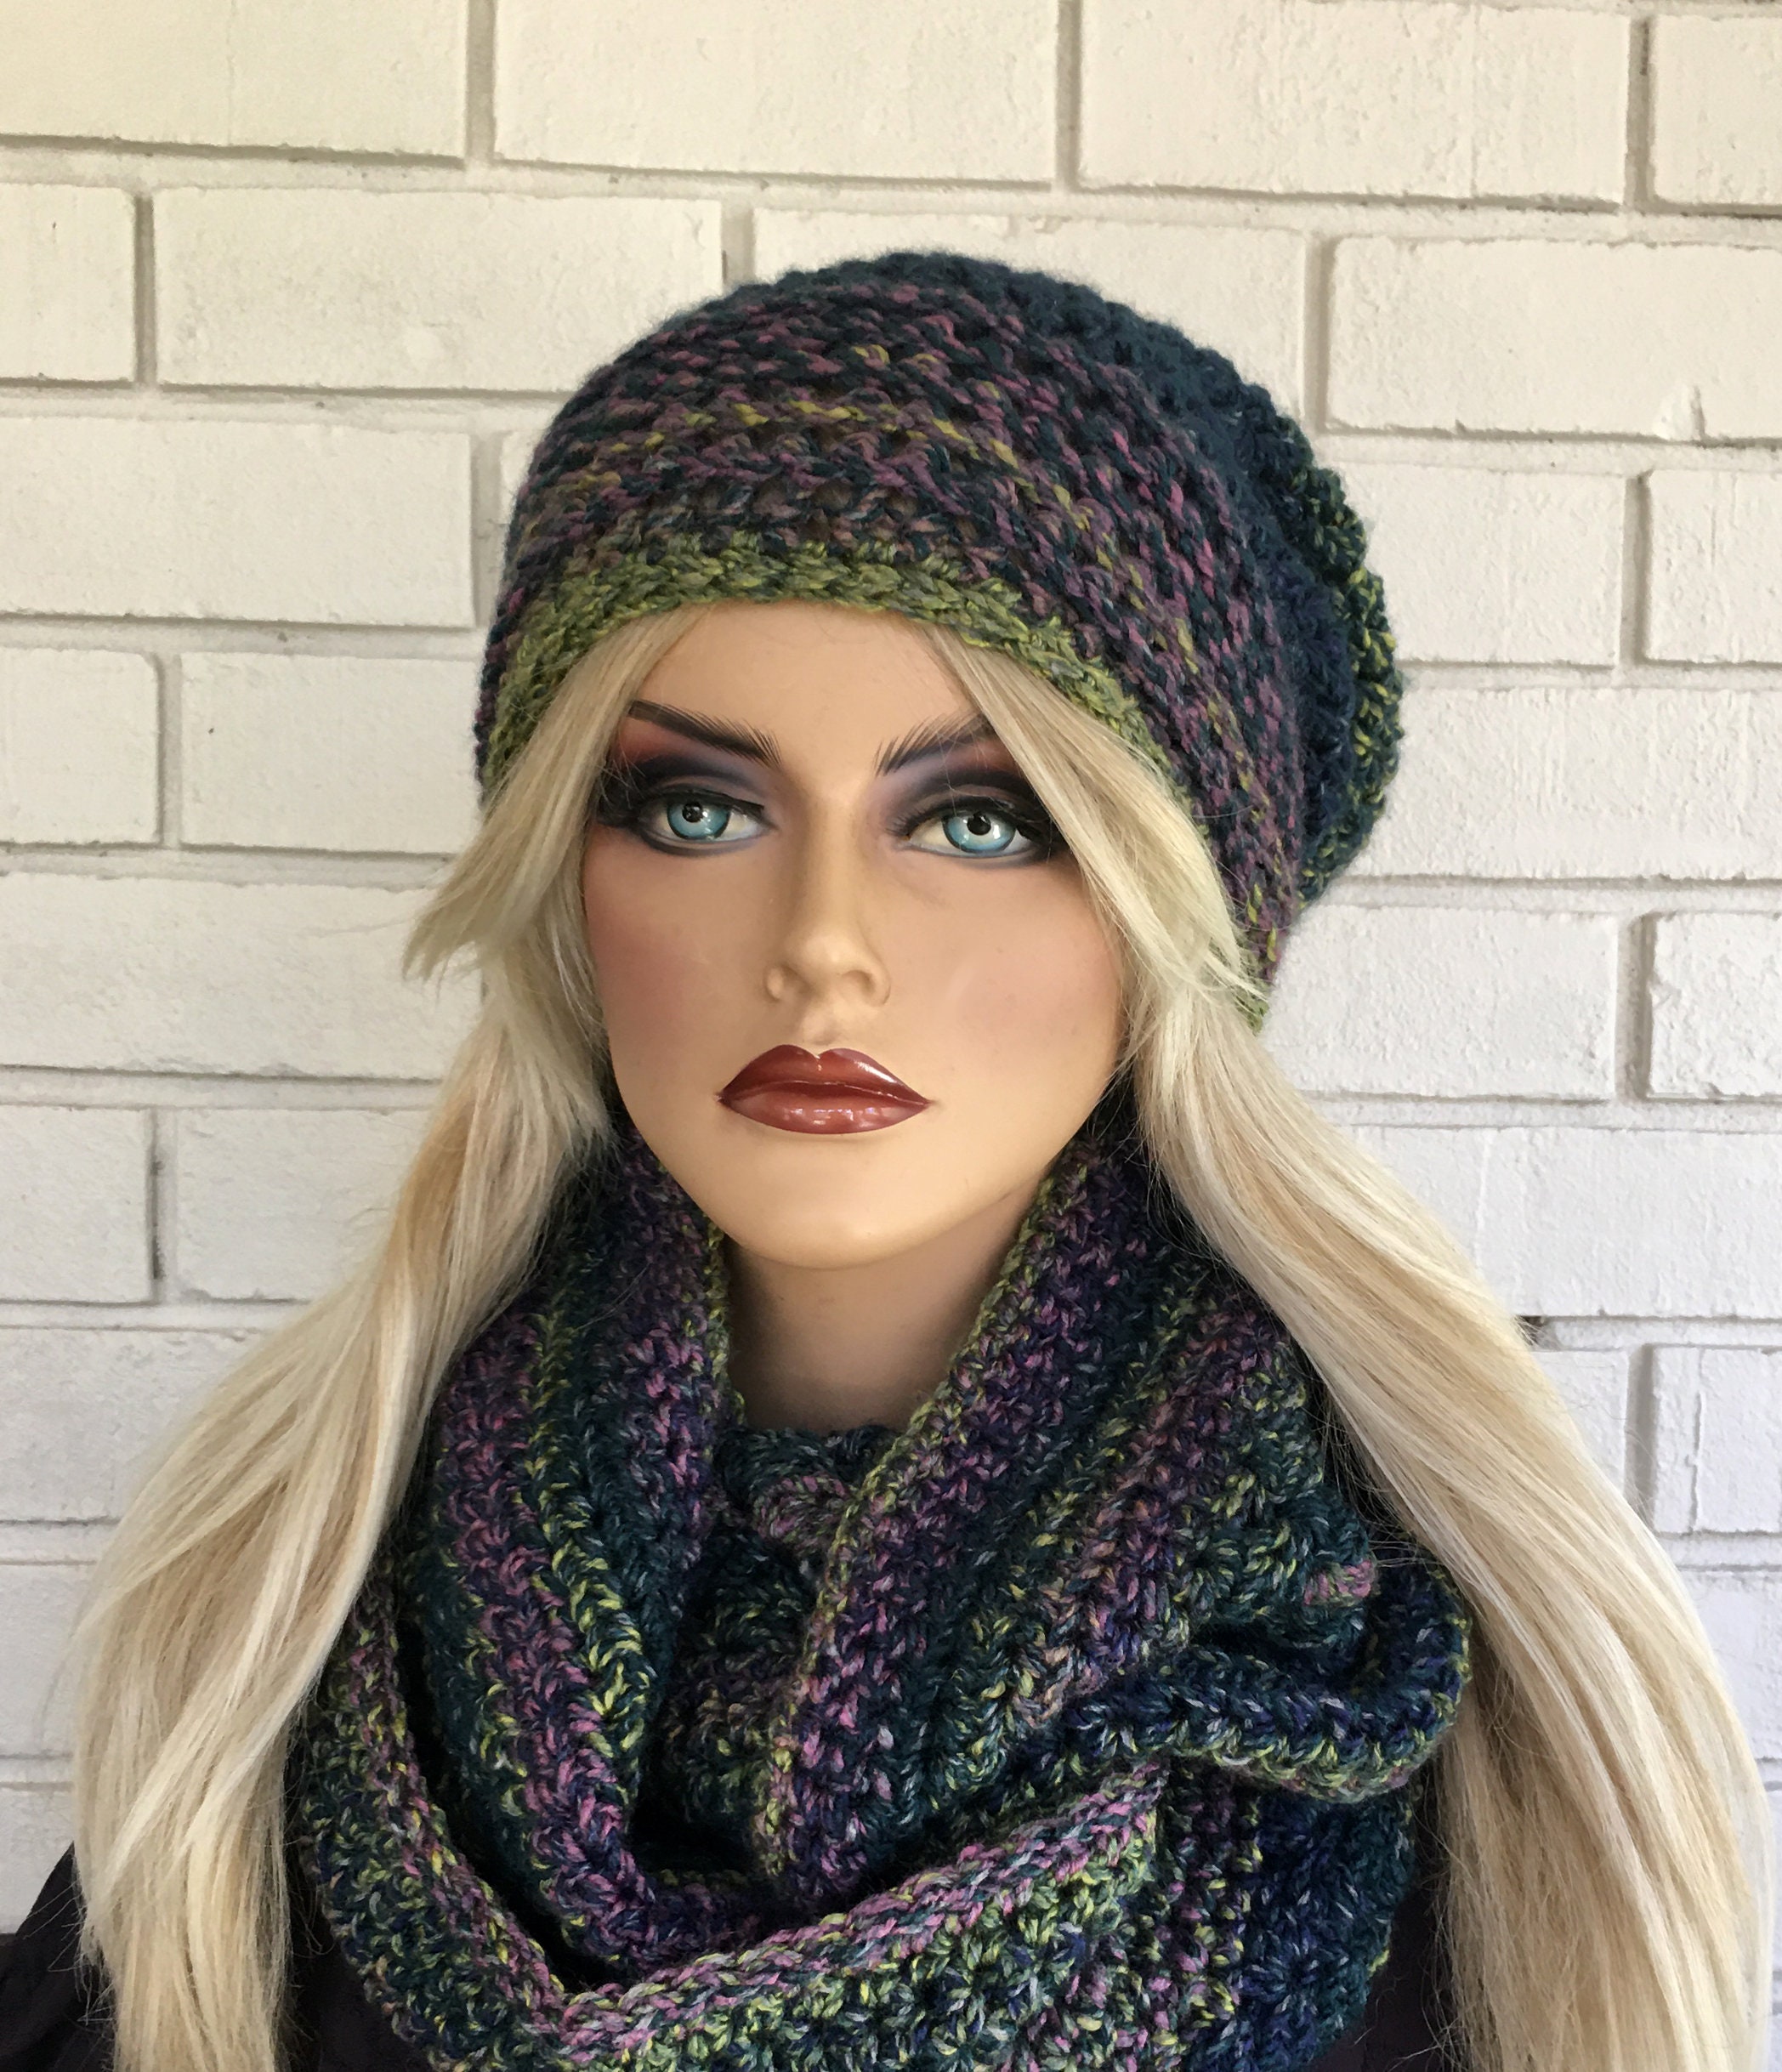 Crochet demi-season hat shawl set Beanie hat Triangle fringes scarf Crochet  wrap Colored winter autumn spring set Handmade gift for her - Winter Hats